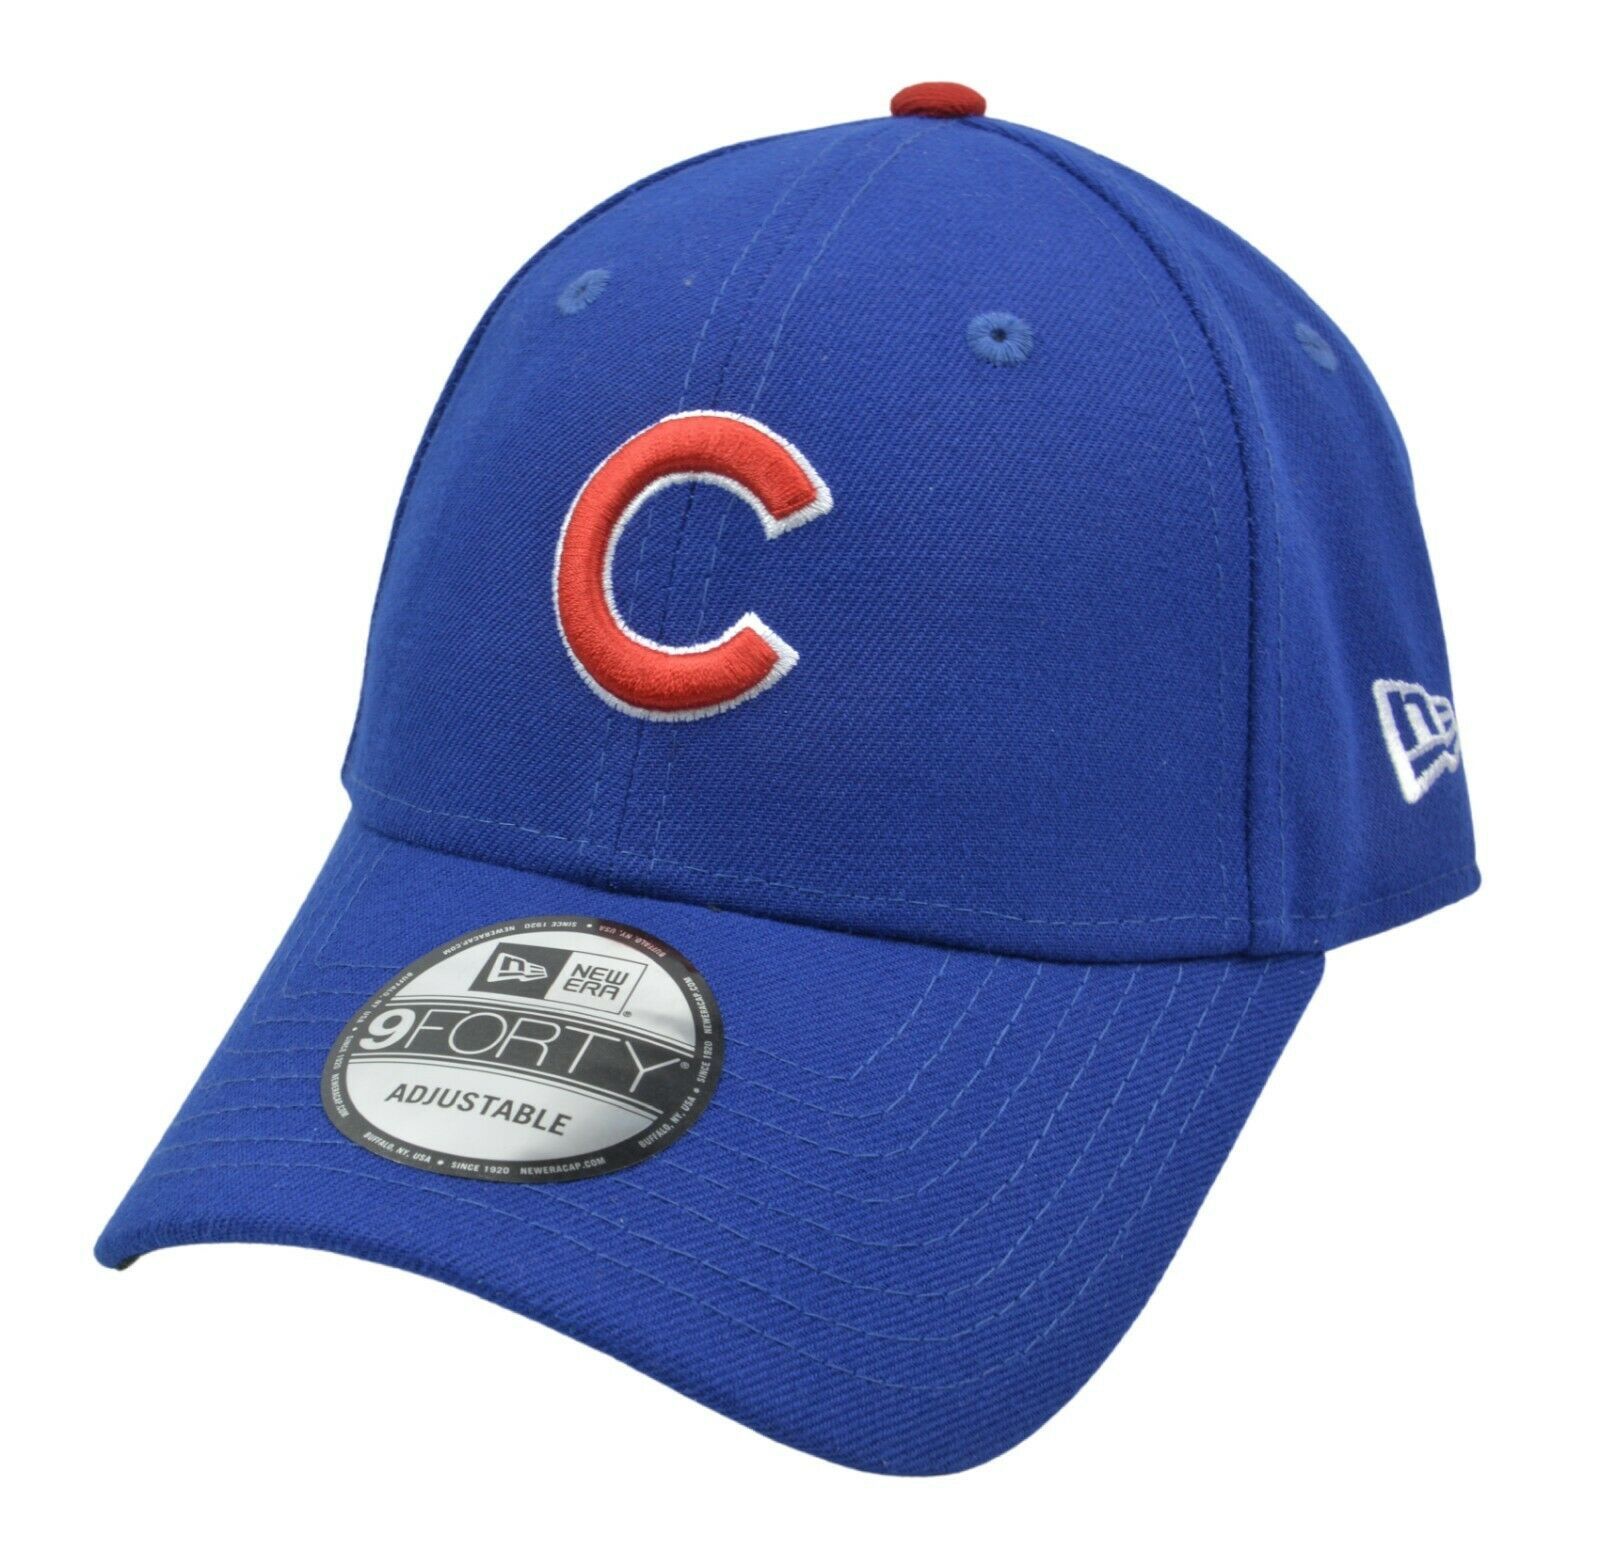 Chicago Cubs New Era 9FORTY Game of Thrones MLB Adjustable Baseball Hat